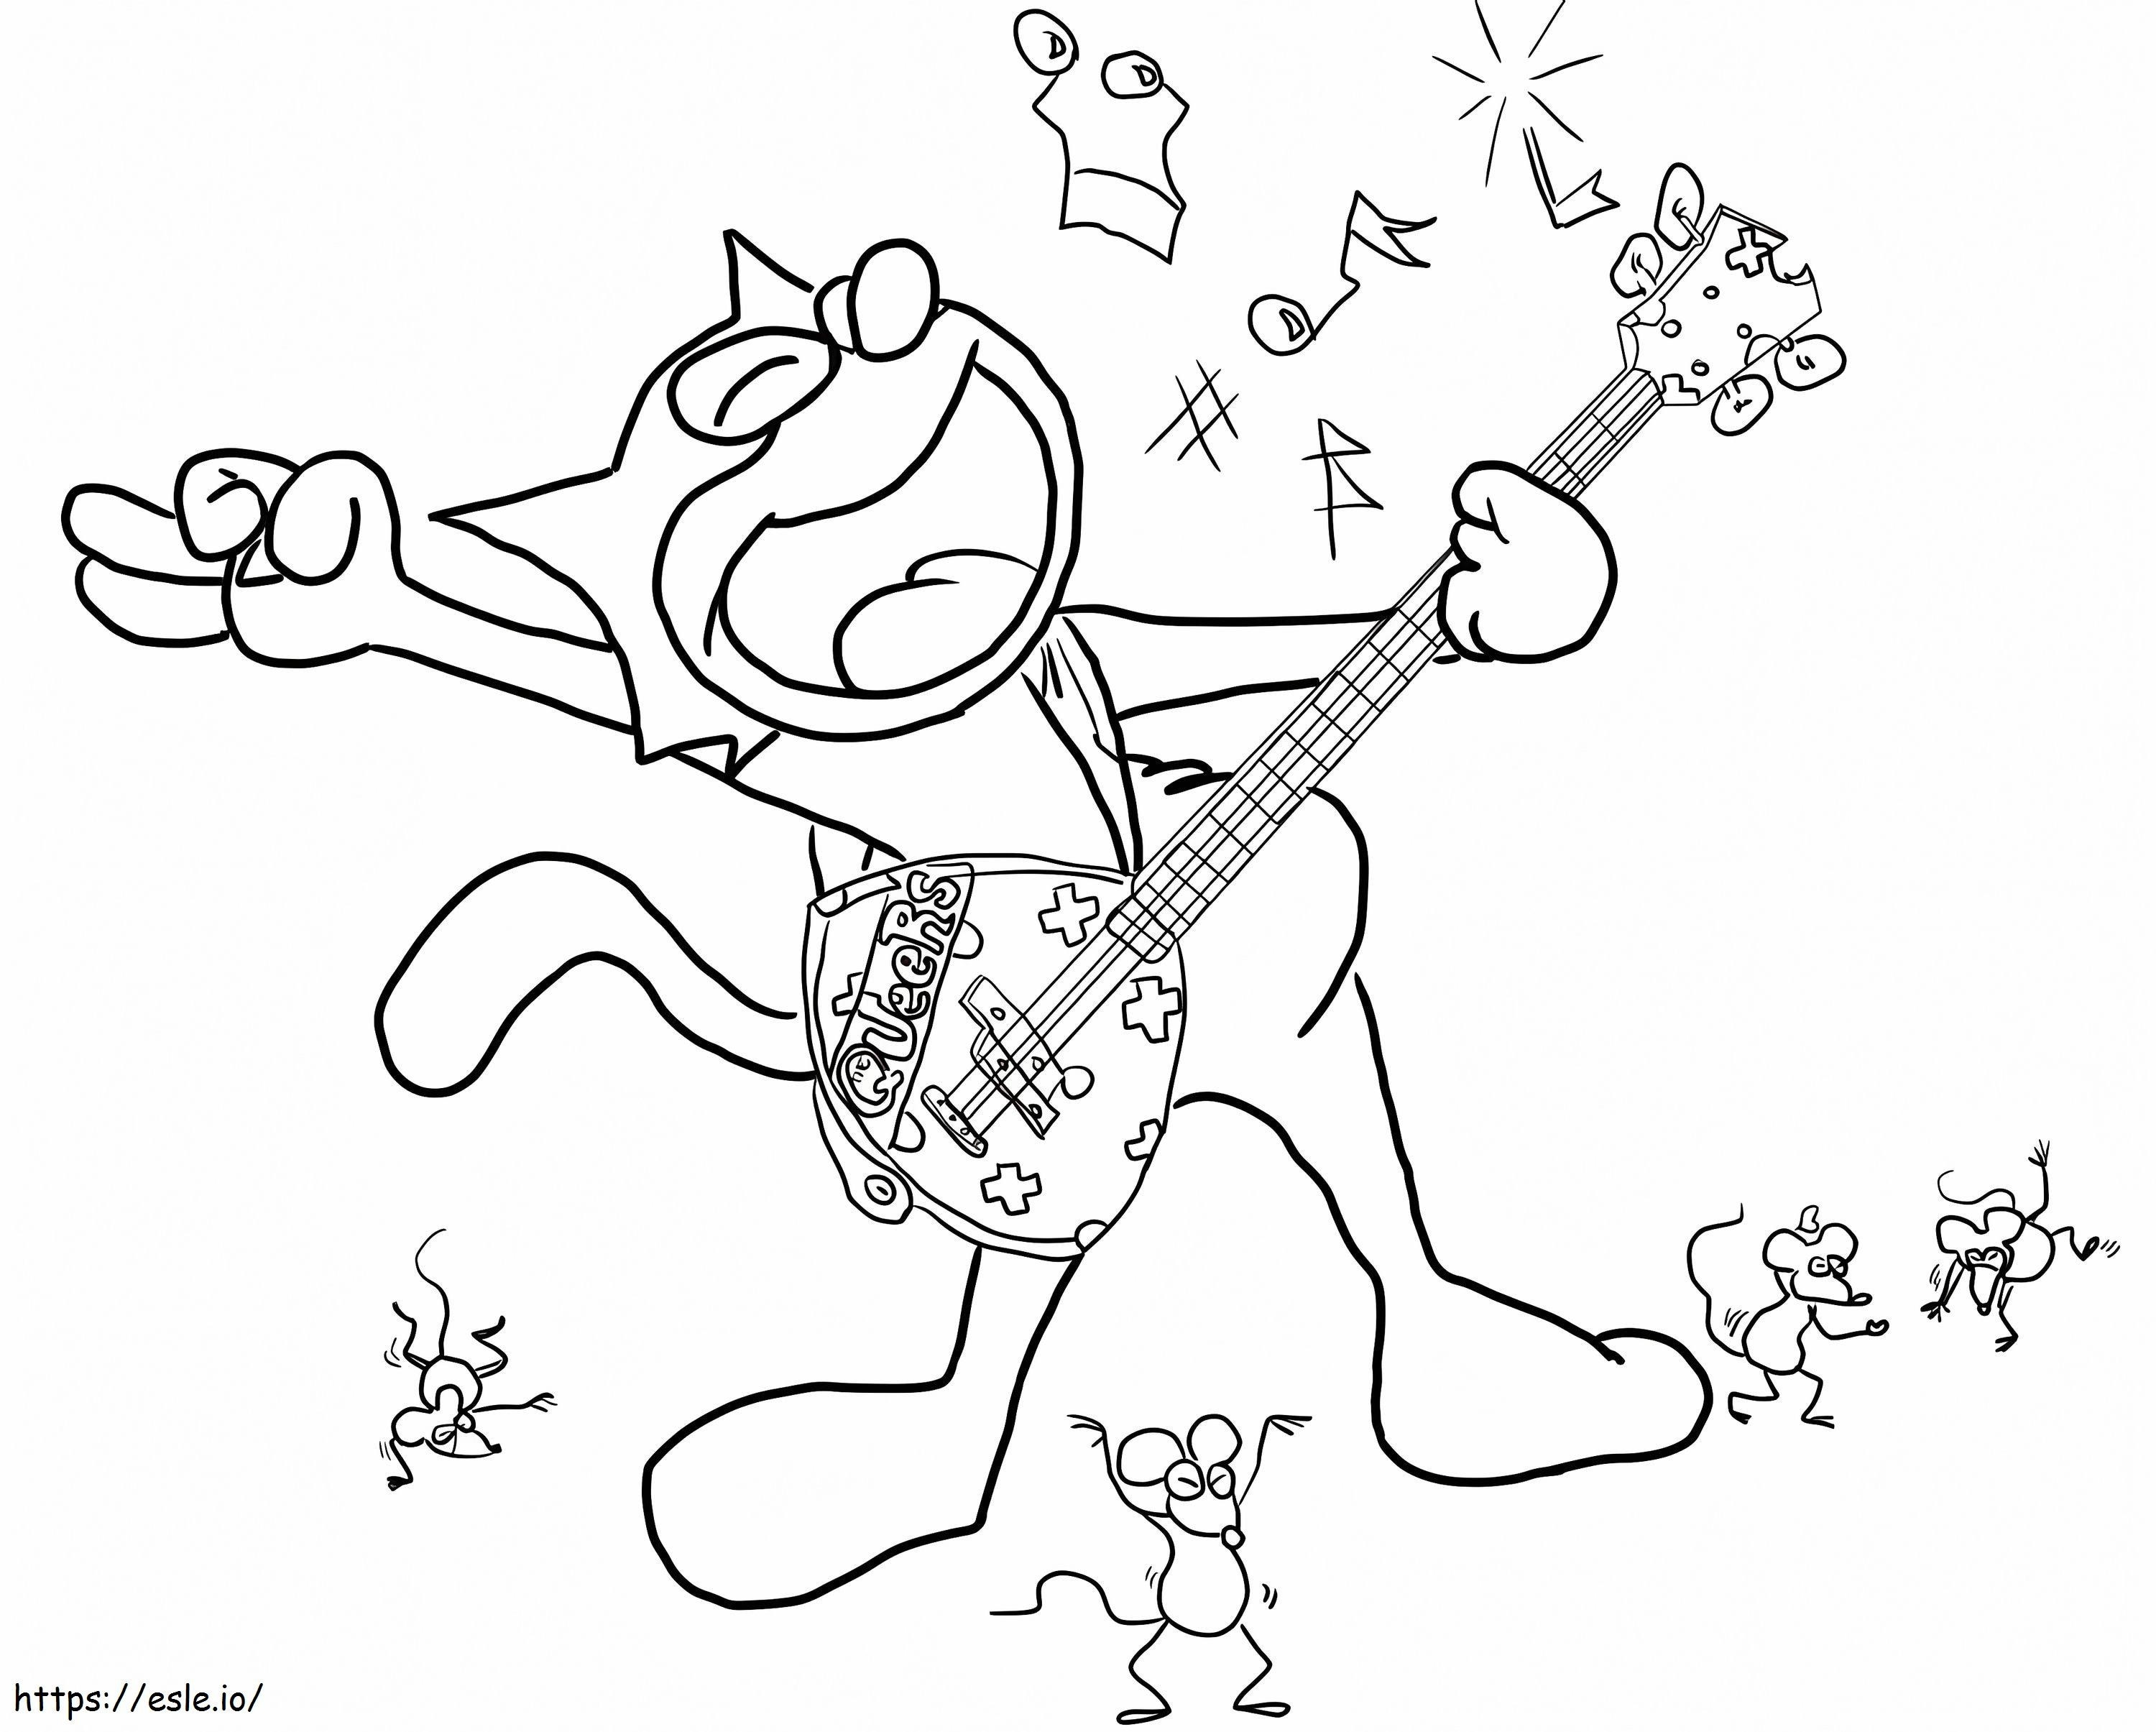 Felix The Cat Playing Guitar coloring page